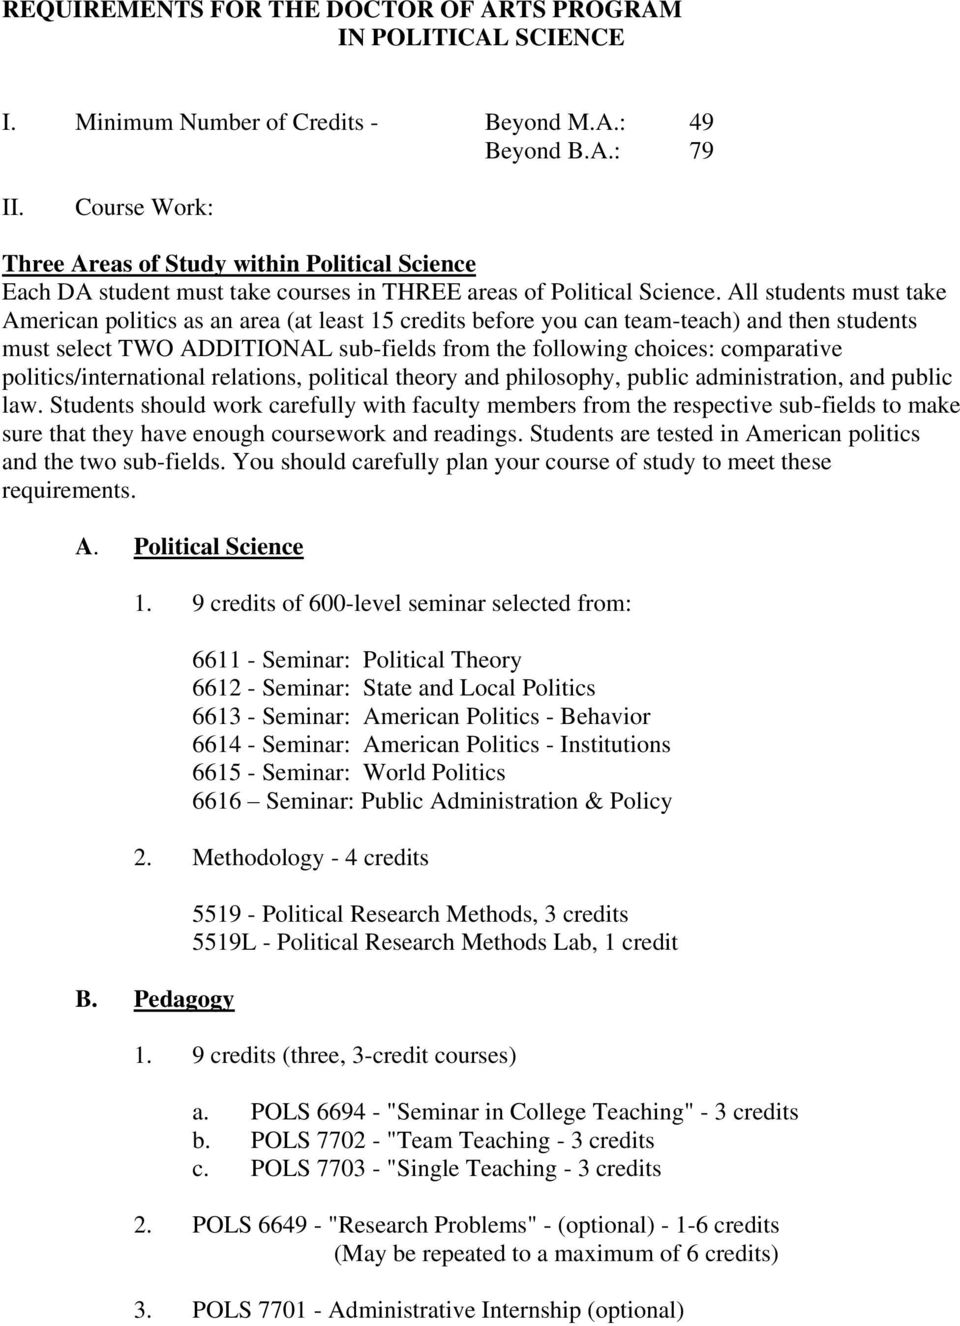 All students must take American politics as an area (at least 15 credits before you can team-teach) and then students must select TWO ADDITIONAL sub-fields from the following choices: comparative